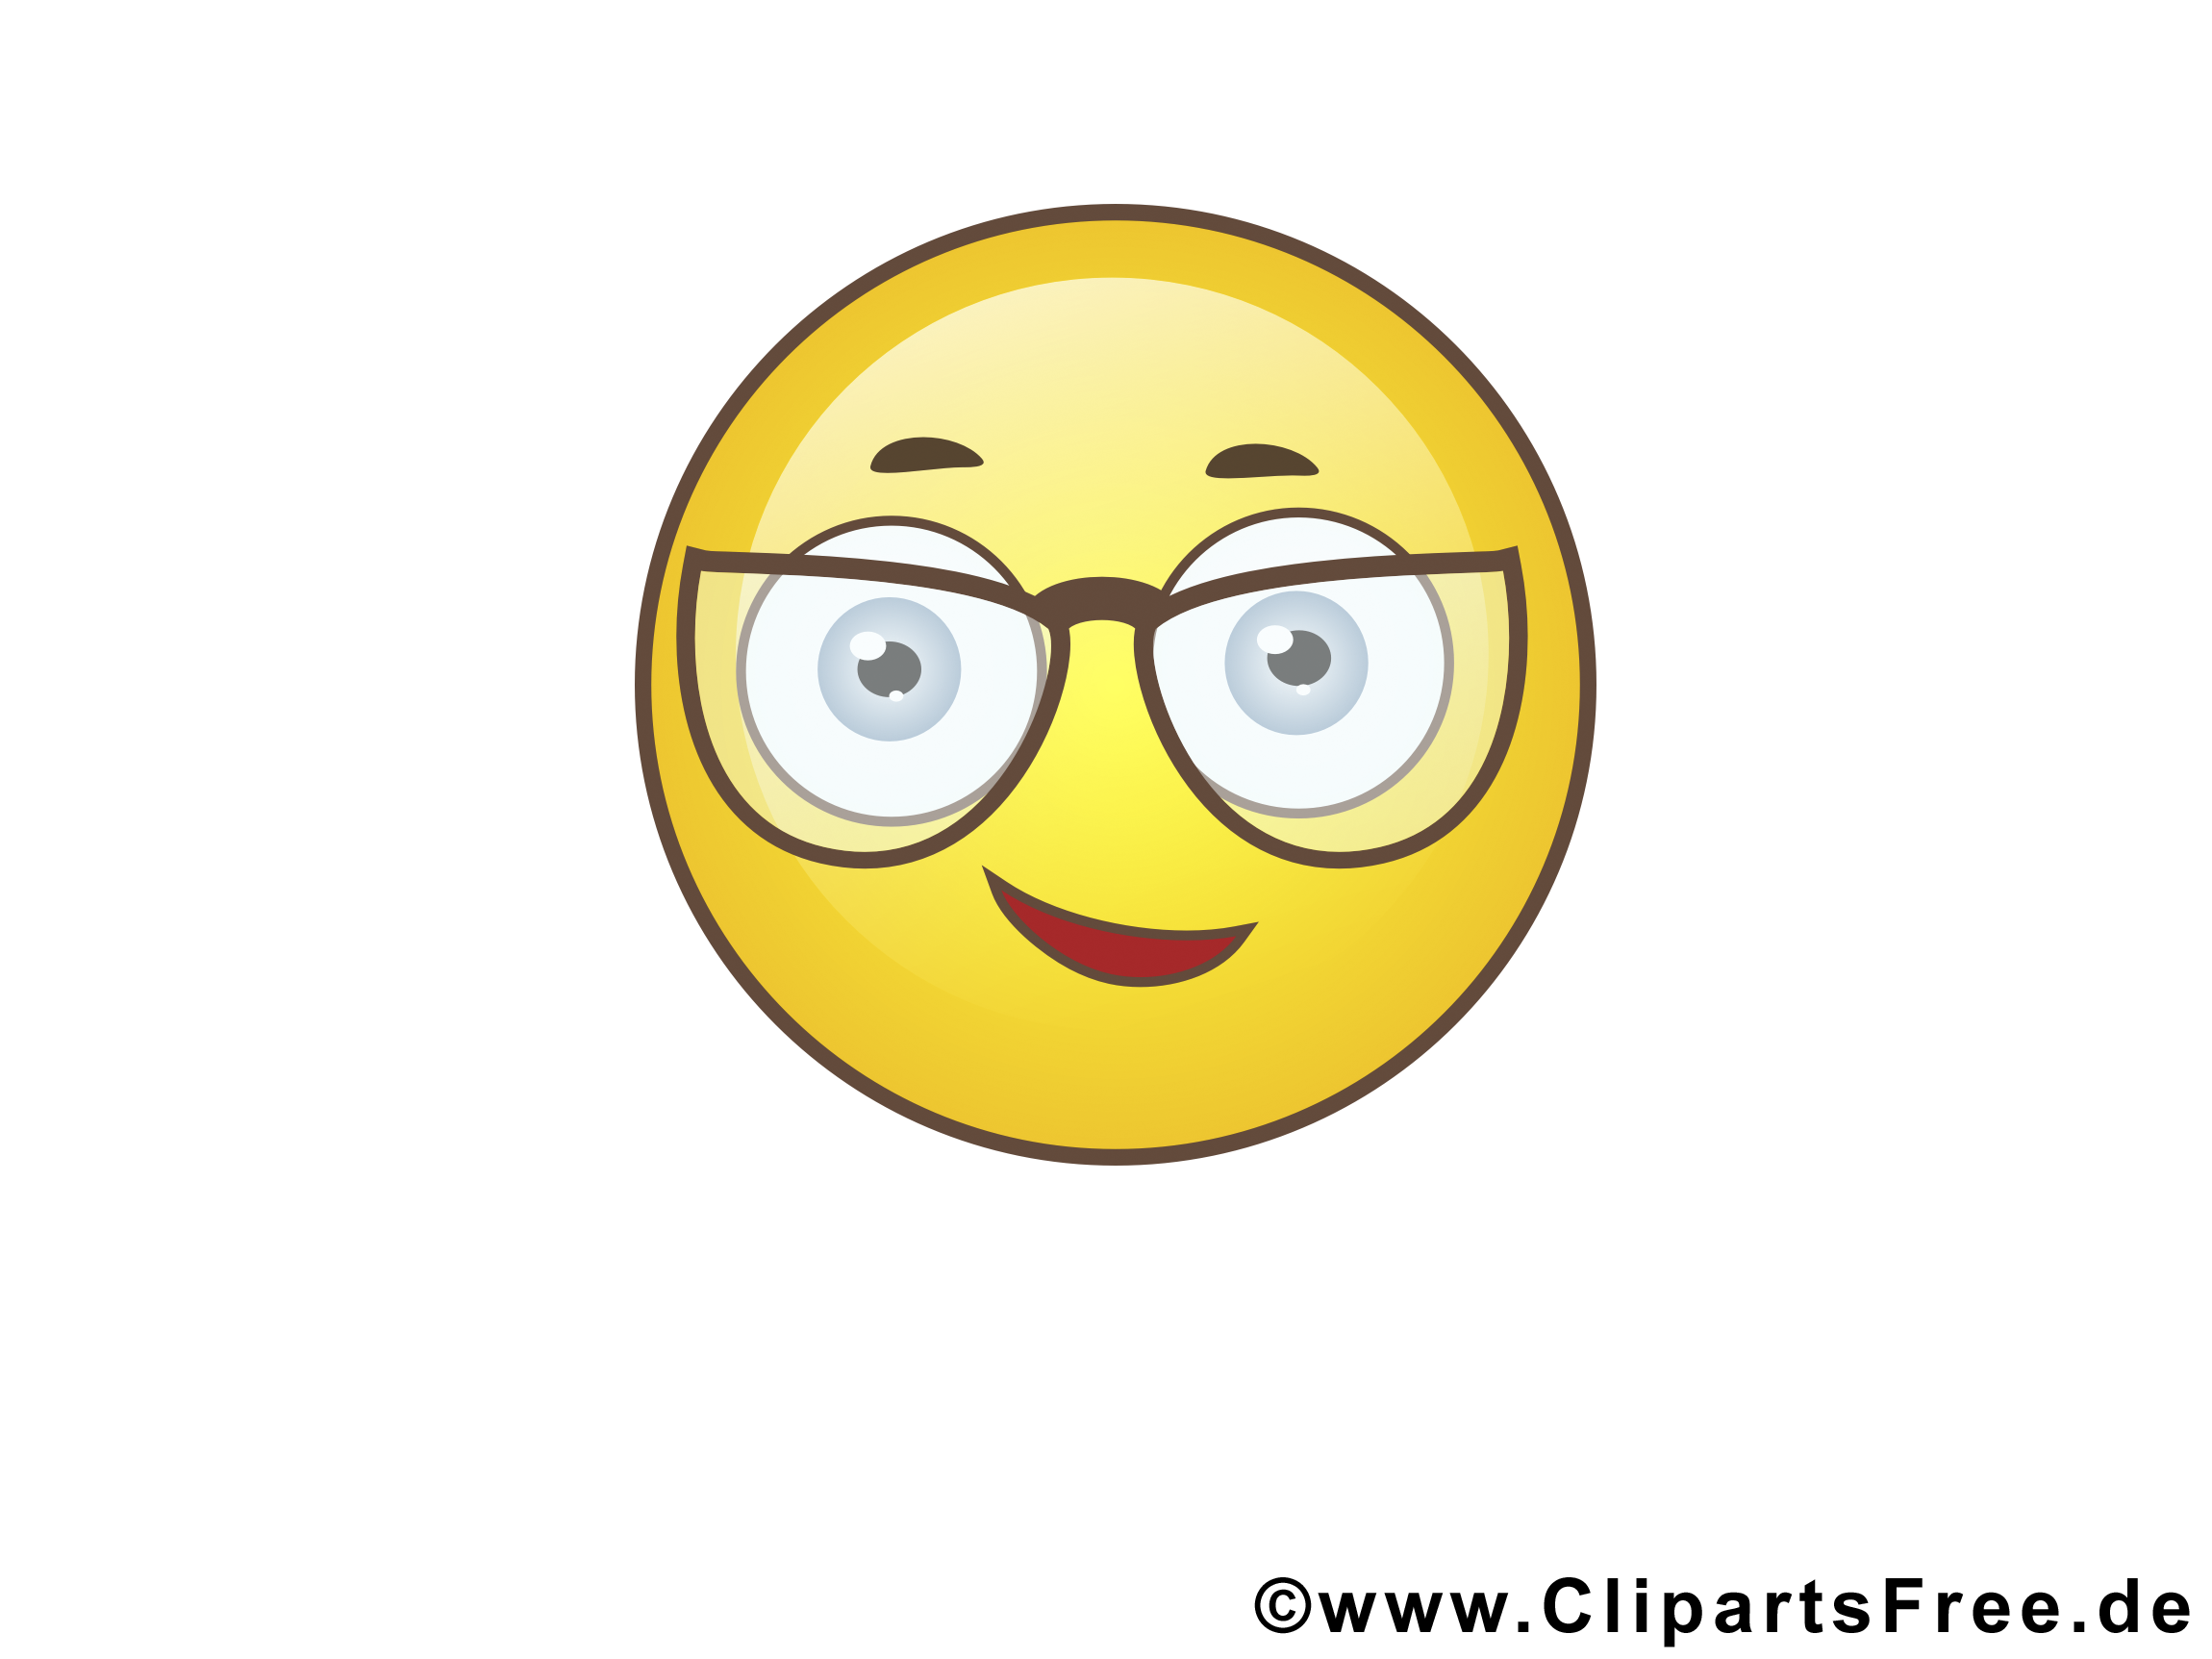 Emojis for smileys, people, families, hand gestures, clothing and accessori...